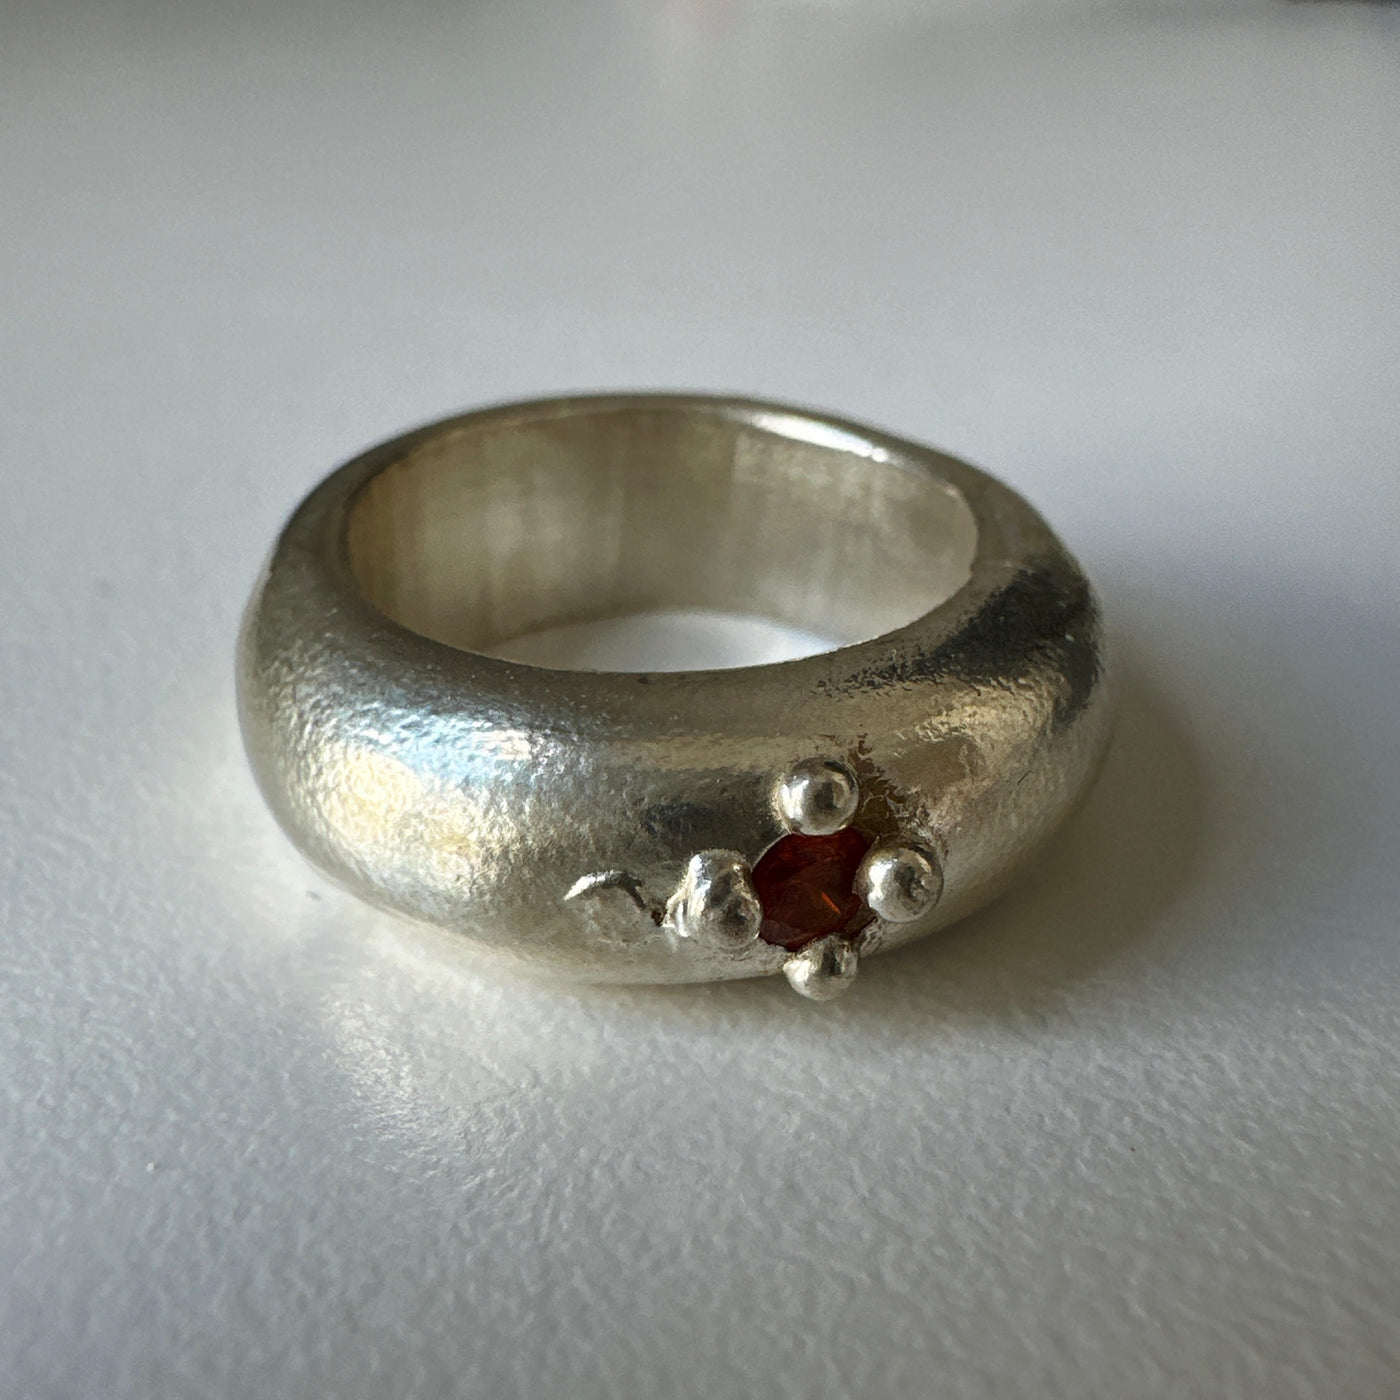 Lost wax silver ring with delicate granulations around an orange cubic zirconia stone